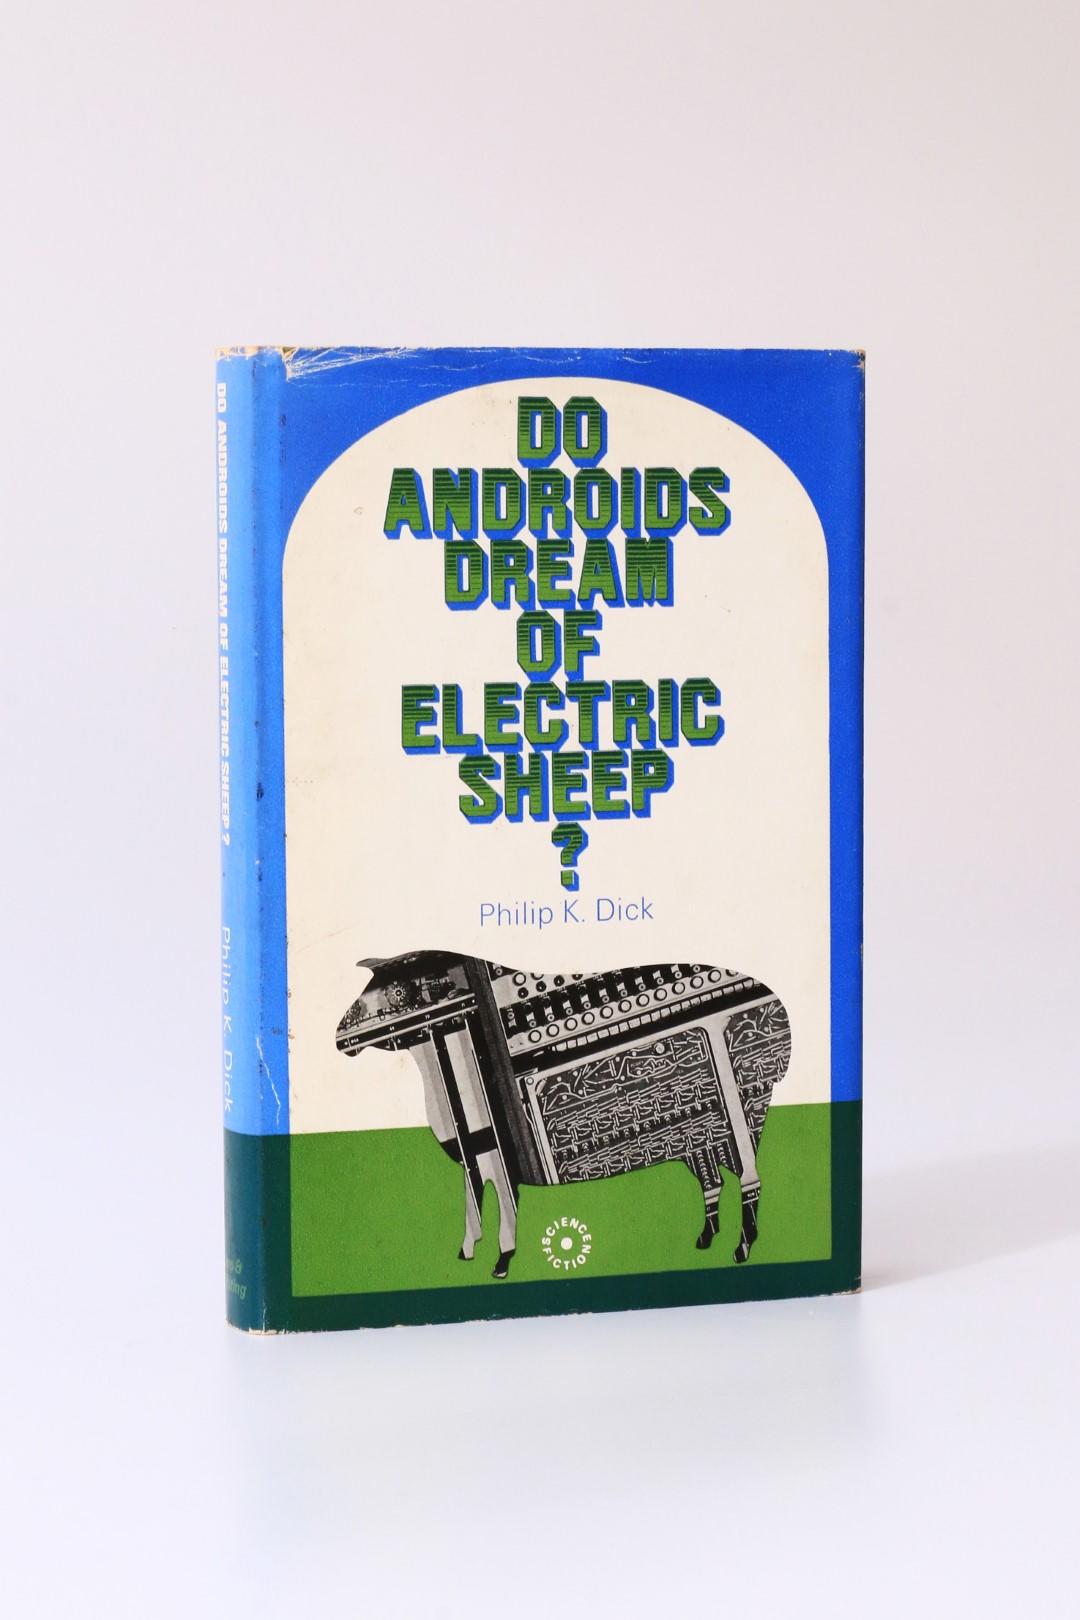 Philip K. Dick - Do Androids Dream of Electric Sheep? - Rapp & Whiting, 1969, First Edition.